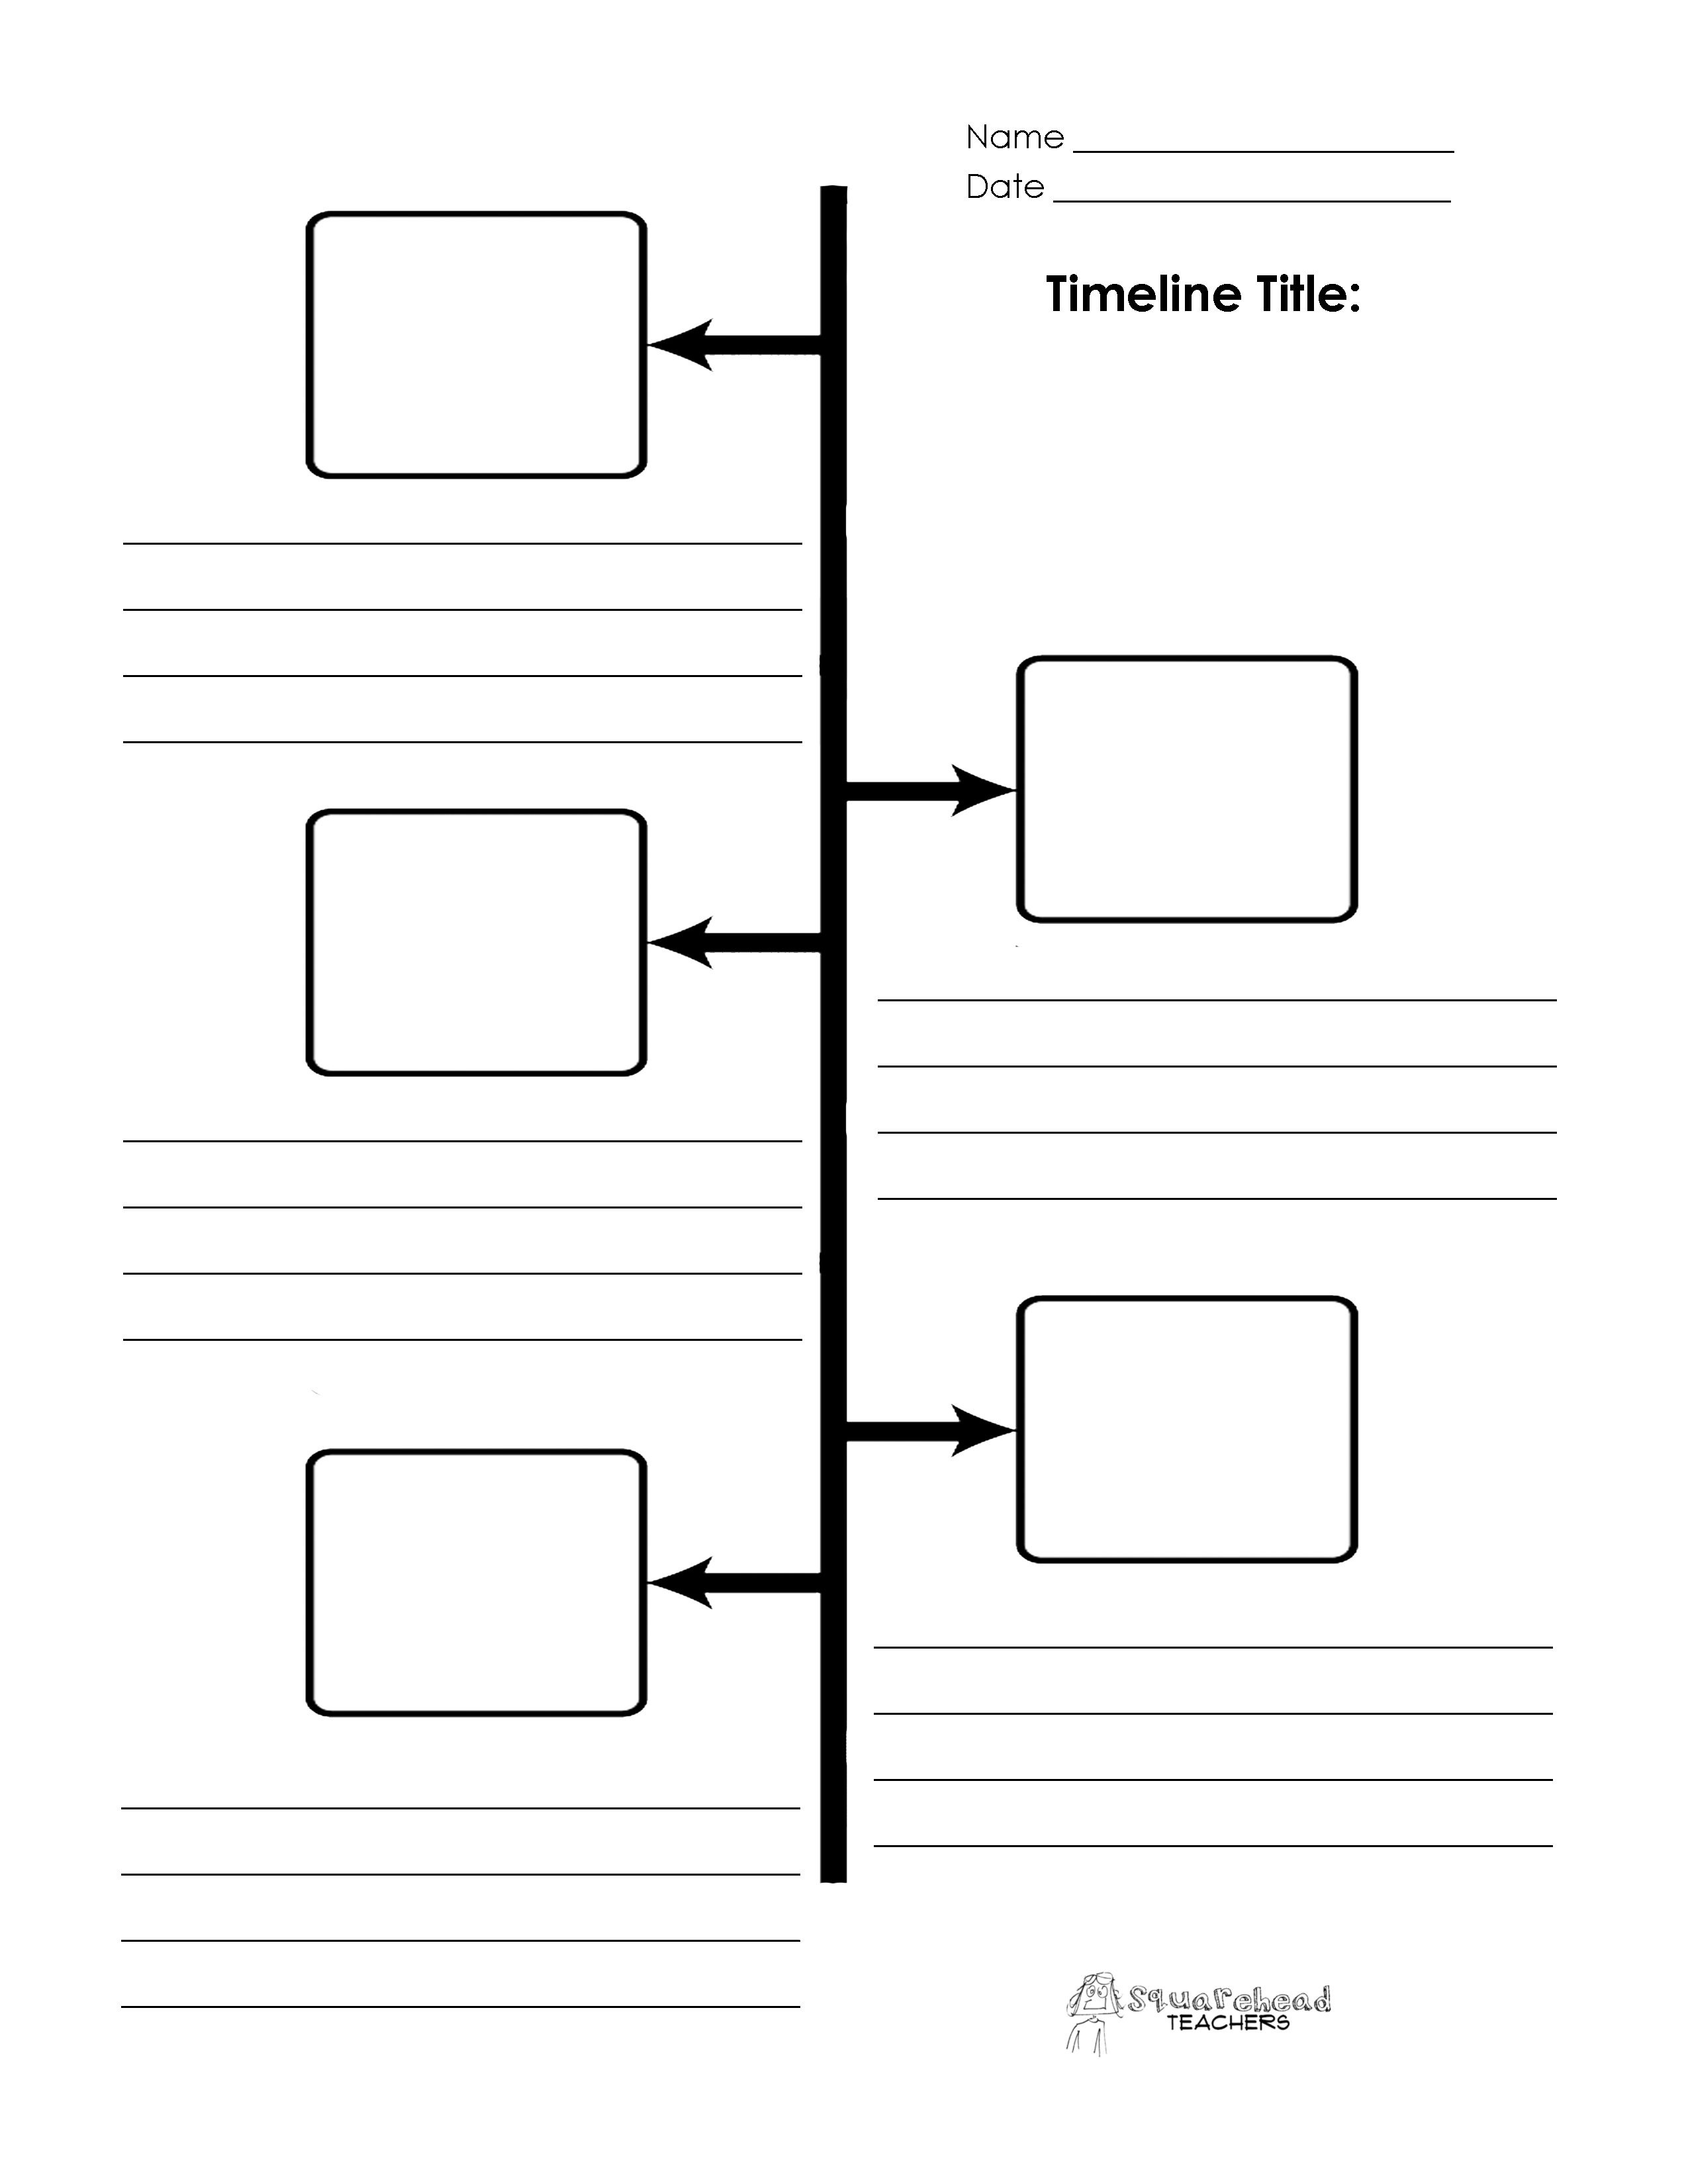 The Matchbox Diary: Social Studies | Sequence Of Events Timeline - Free Blank Timeline Template Printable